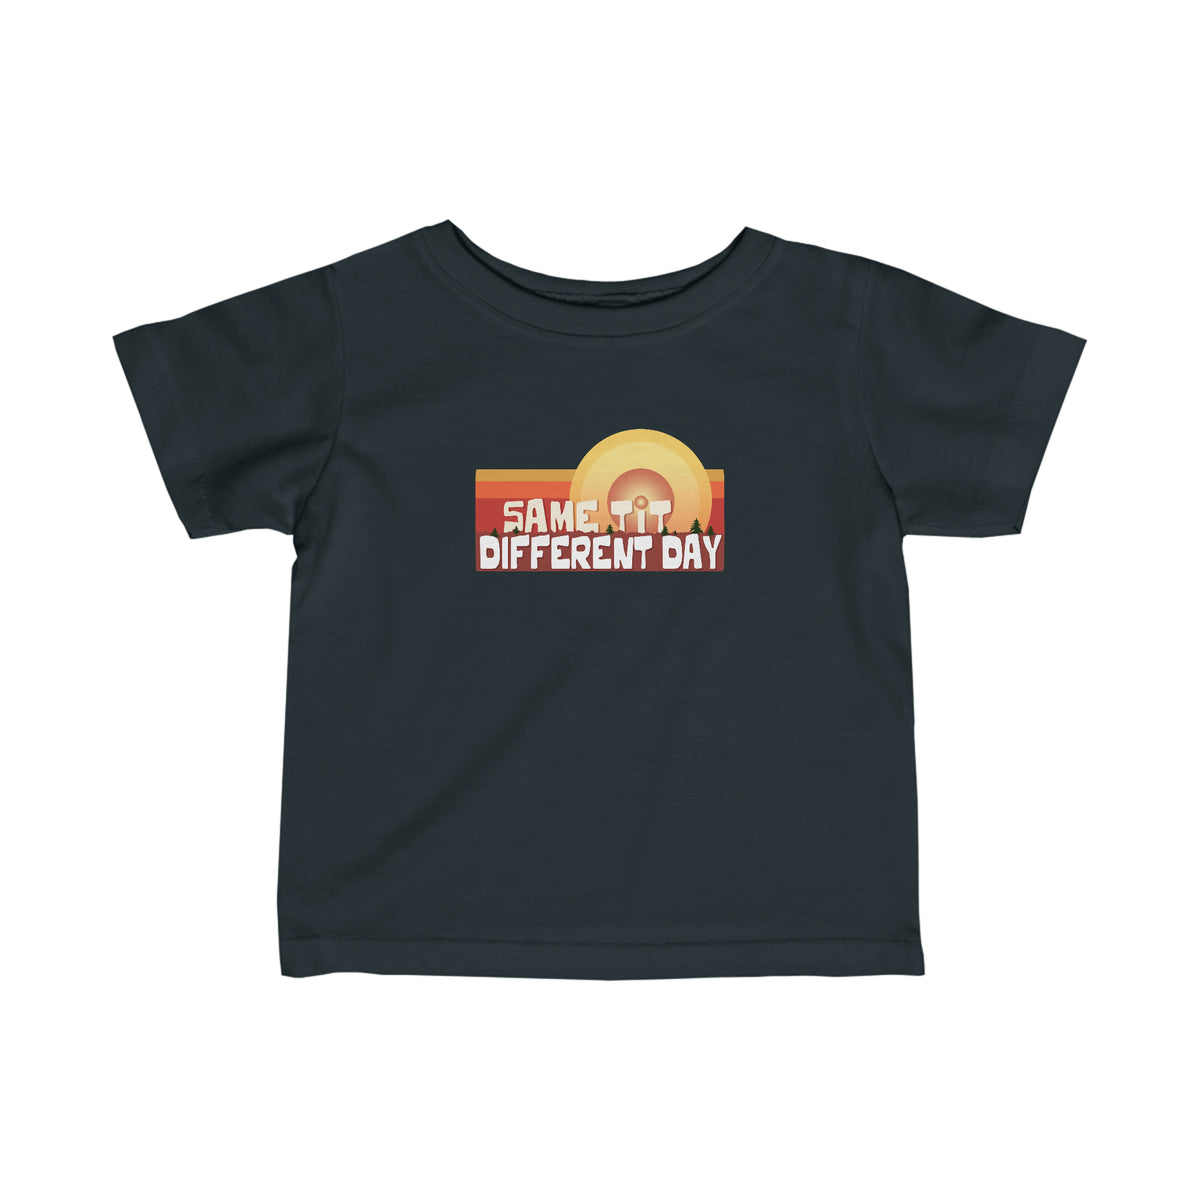 Same Tit Different Day - Baby T-Shirt